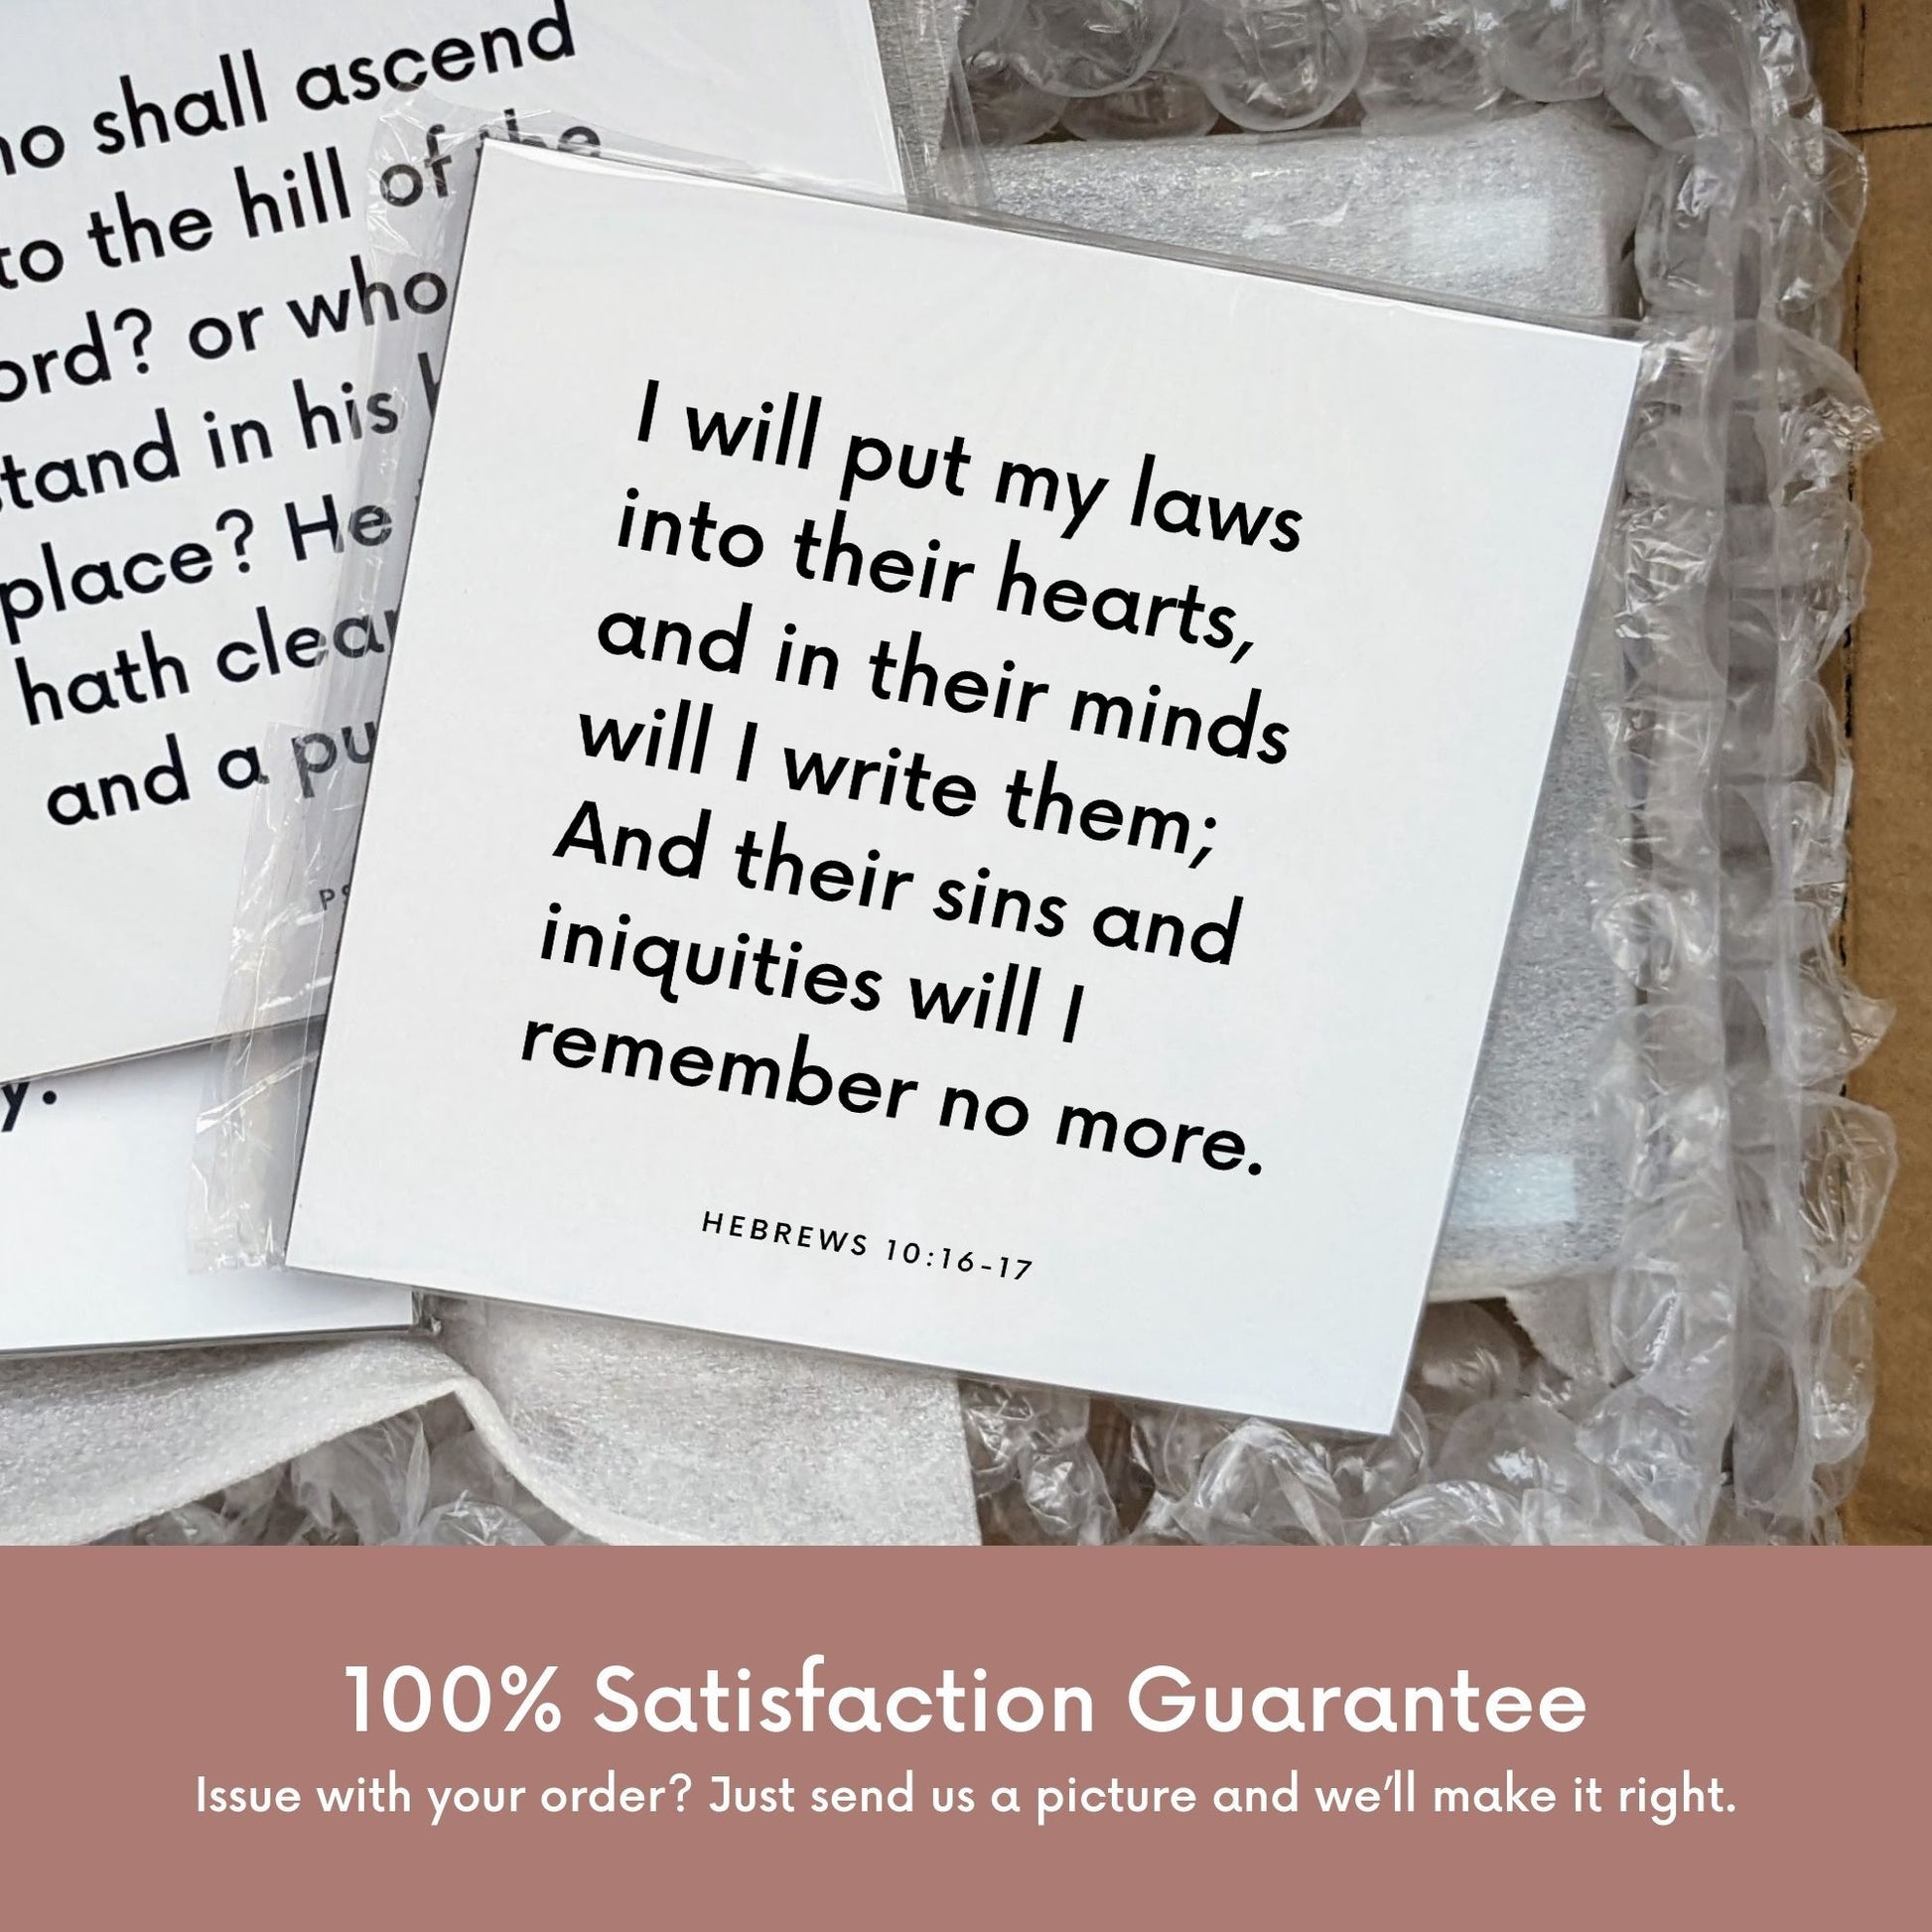 Shipping materials for scripture tile of Hebrews 10:16-17 - "I will put my laws into their hearts, and in their minds"